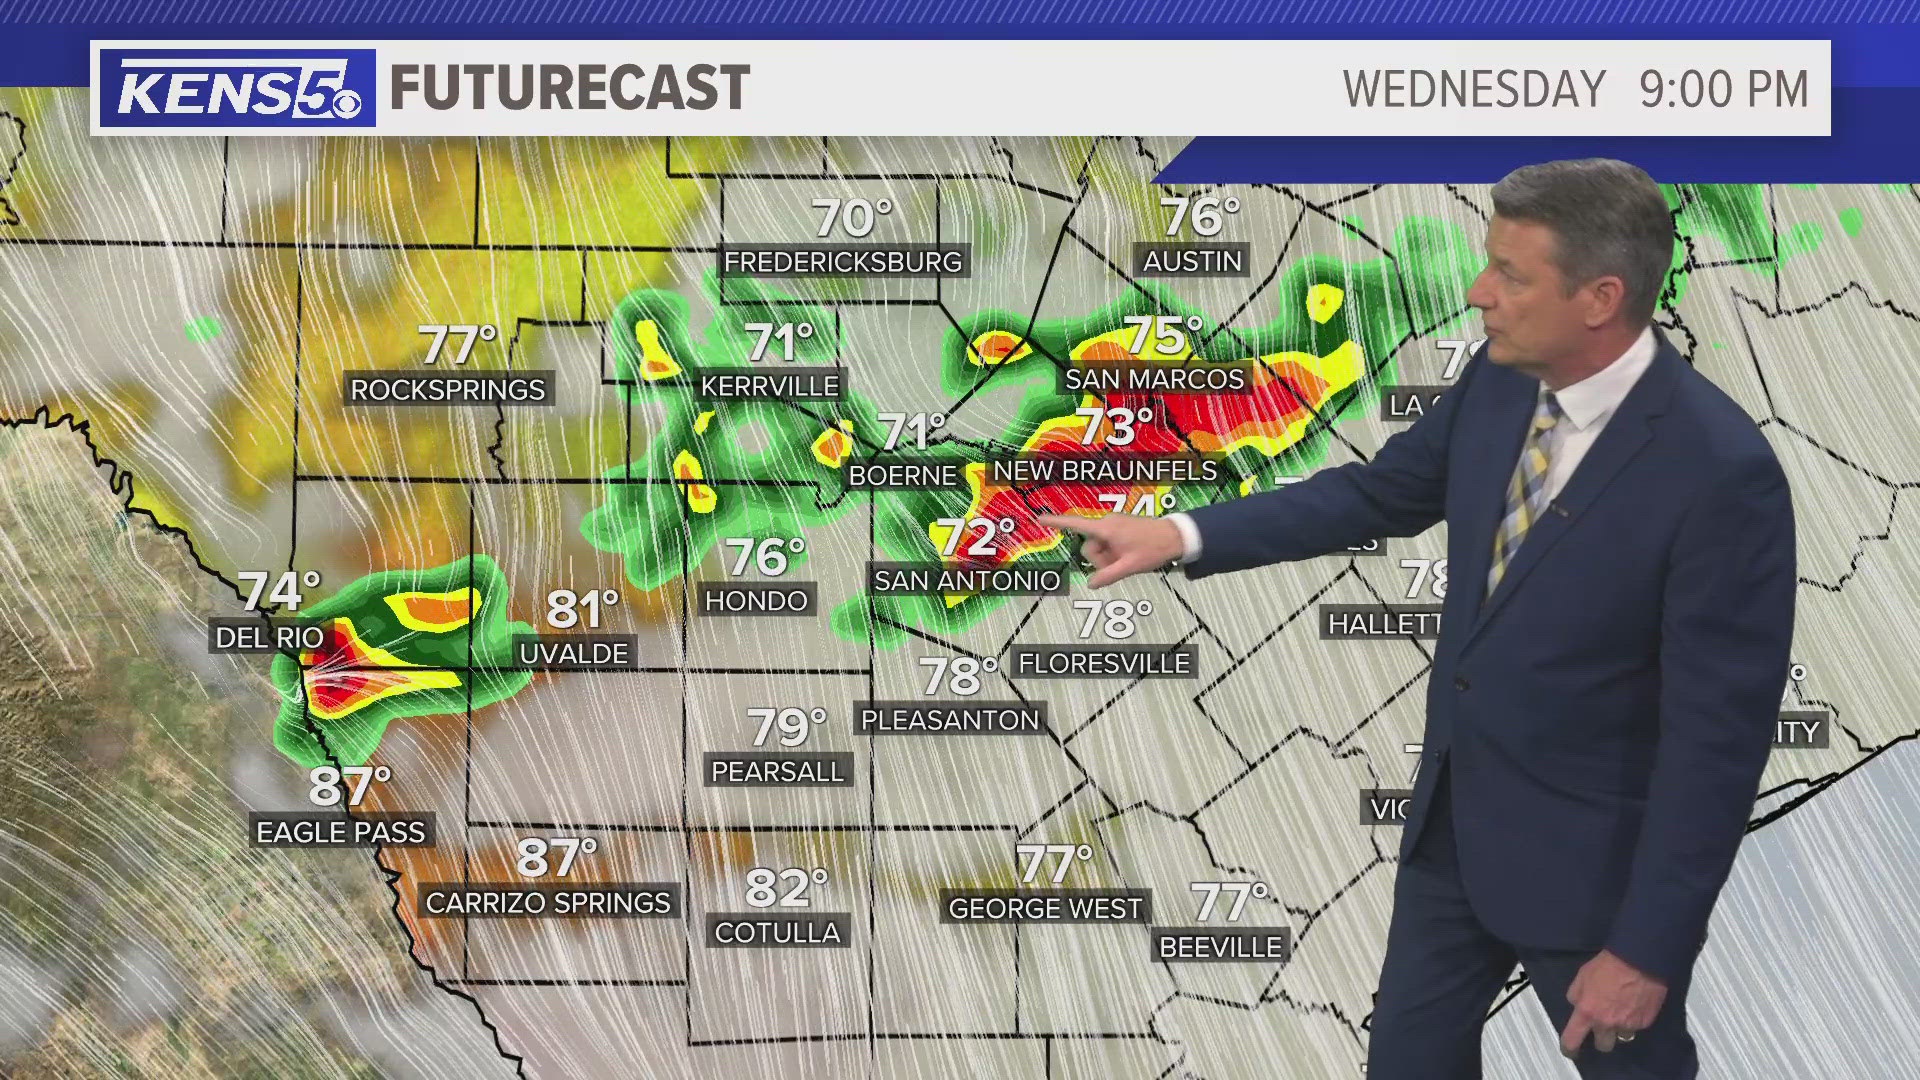 Storms developing for later this evening could be severe. Weather Chief Bill Taylor and Meteorologist Ryan Shoptaugh are tracking the Wednesday thunderstorms.